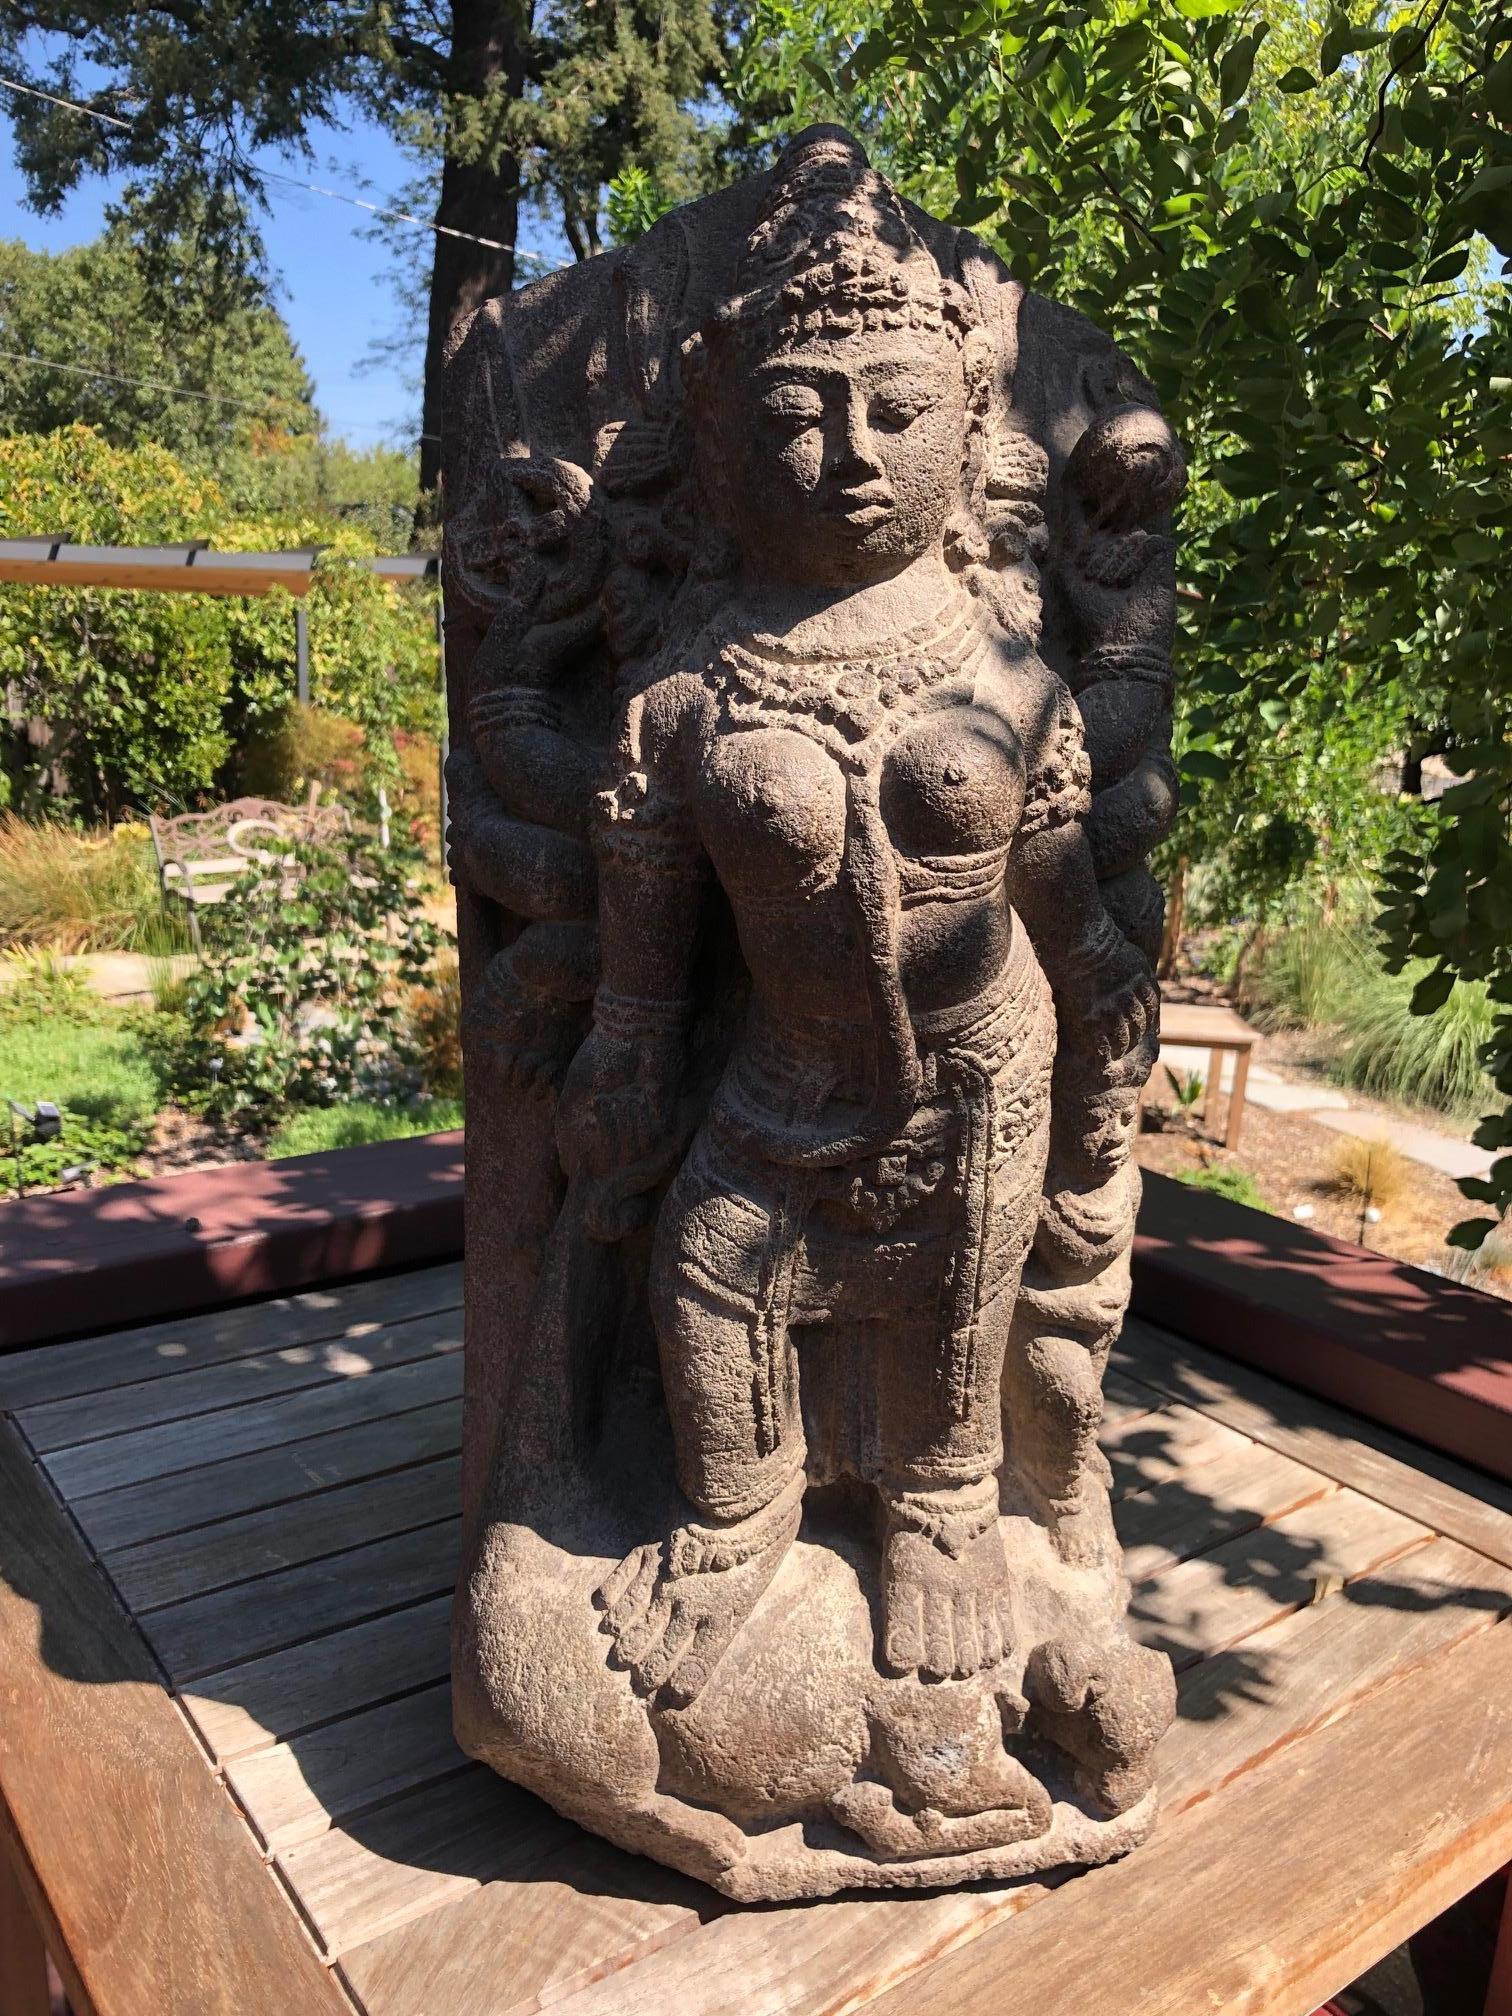 Masterpiece 9th century stone durga from Java. This sculpture is one of the finest I've had the pleasure of offering in over 30 years. The Deep spiritual presence is palpable in the face and overall stance of the Durga figure. The carving is